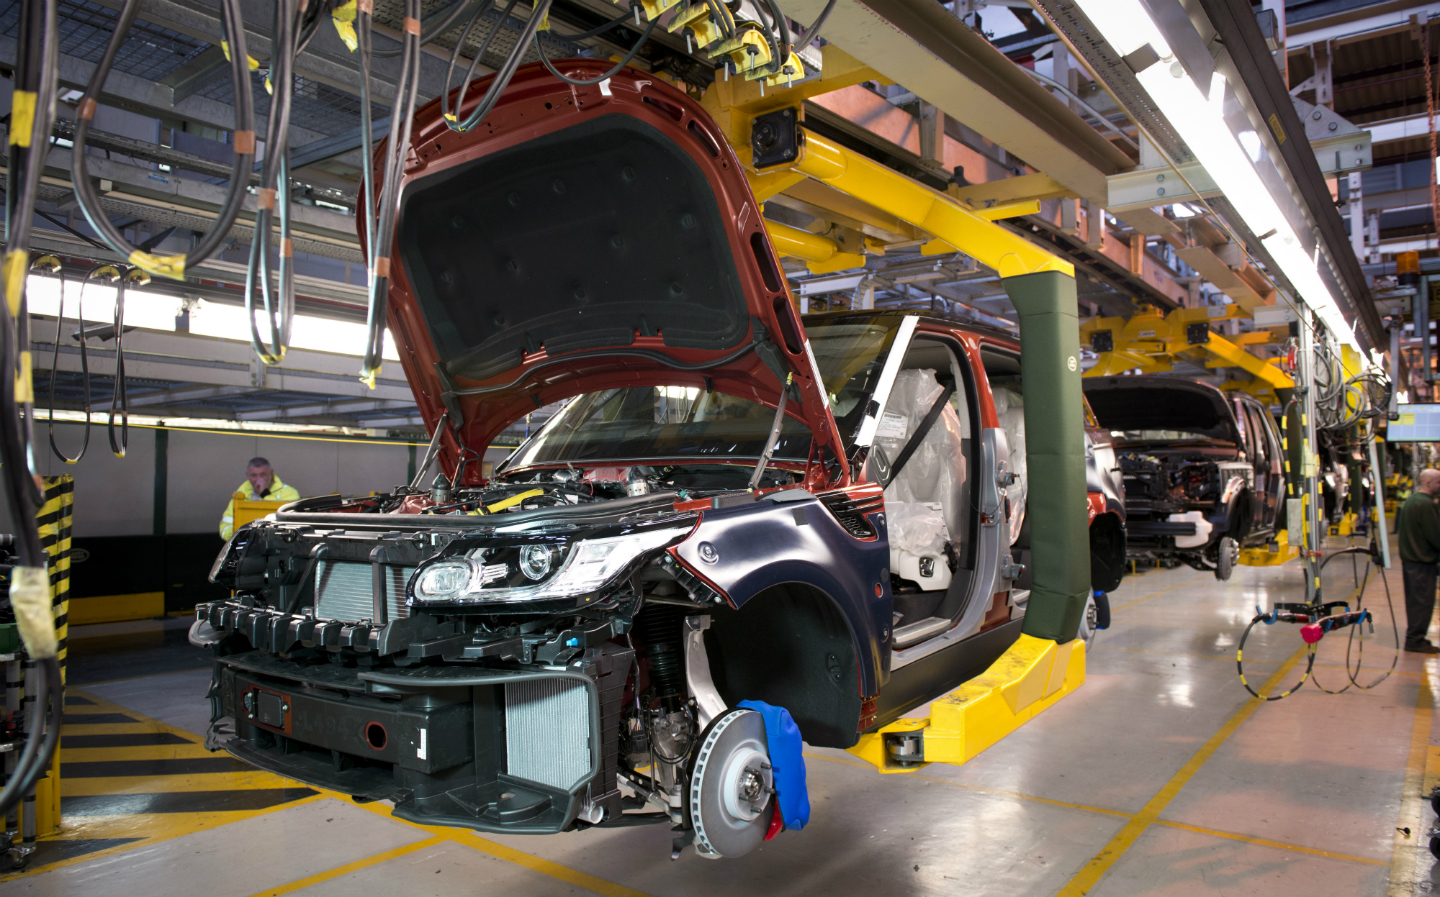 Automotive business leaders welcome £4bn Advanced Manufacturing Plan from UK government